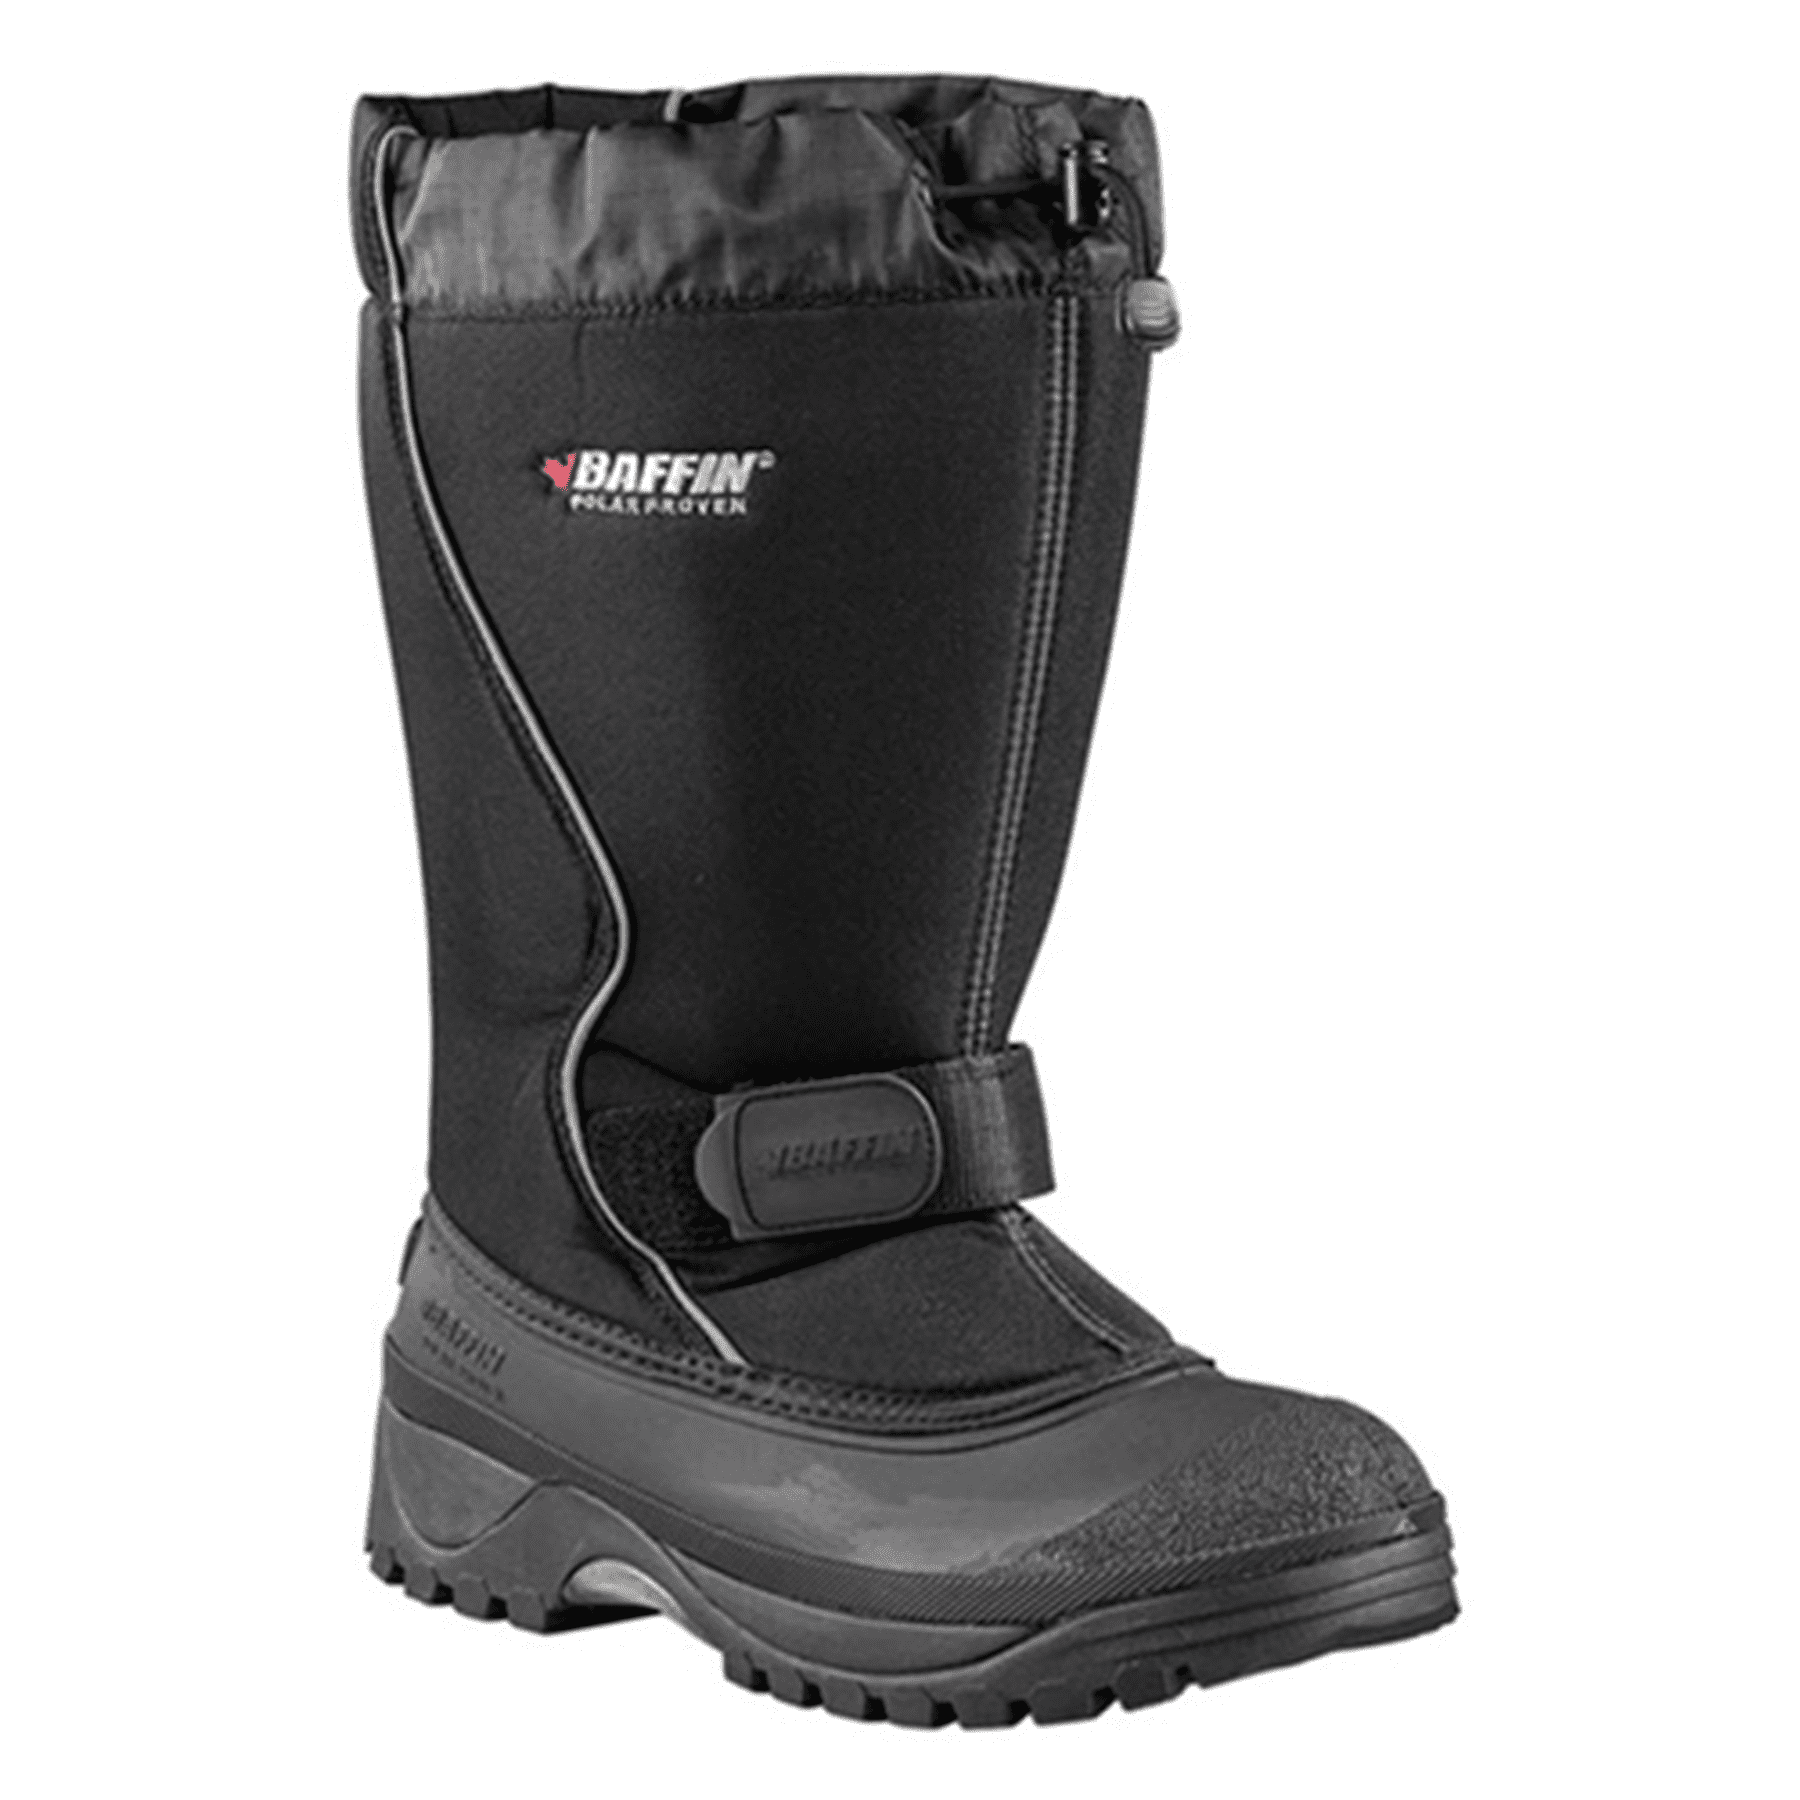 Baffin Winter Boots Size Chart